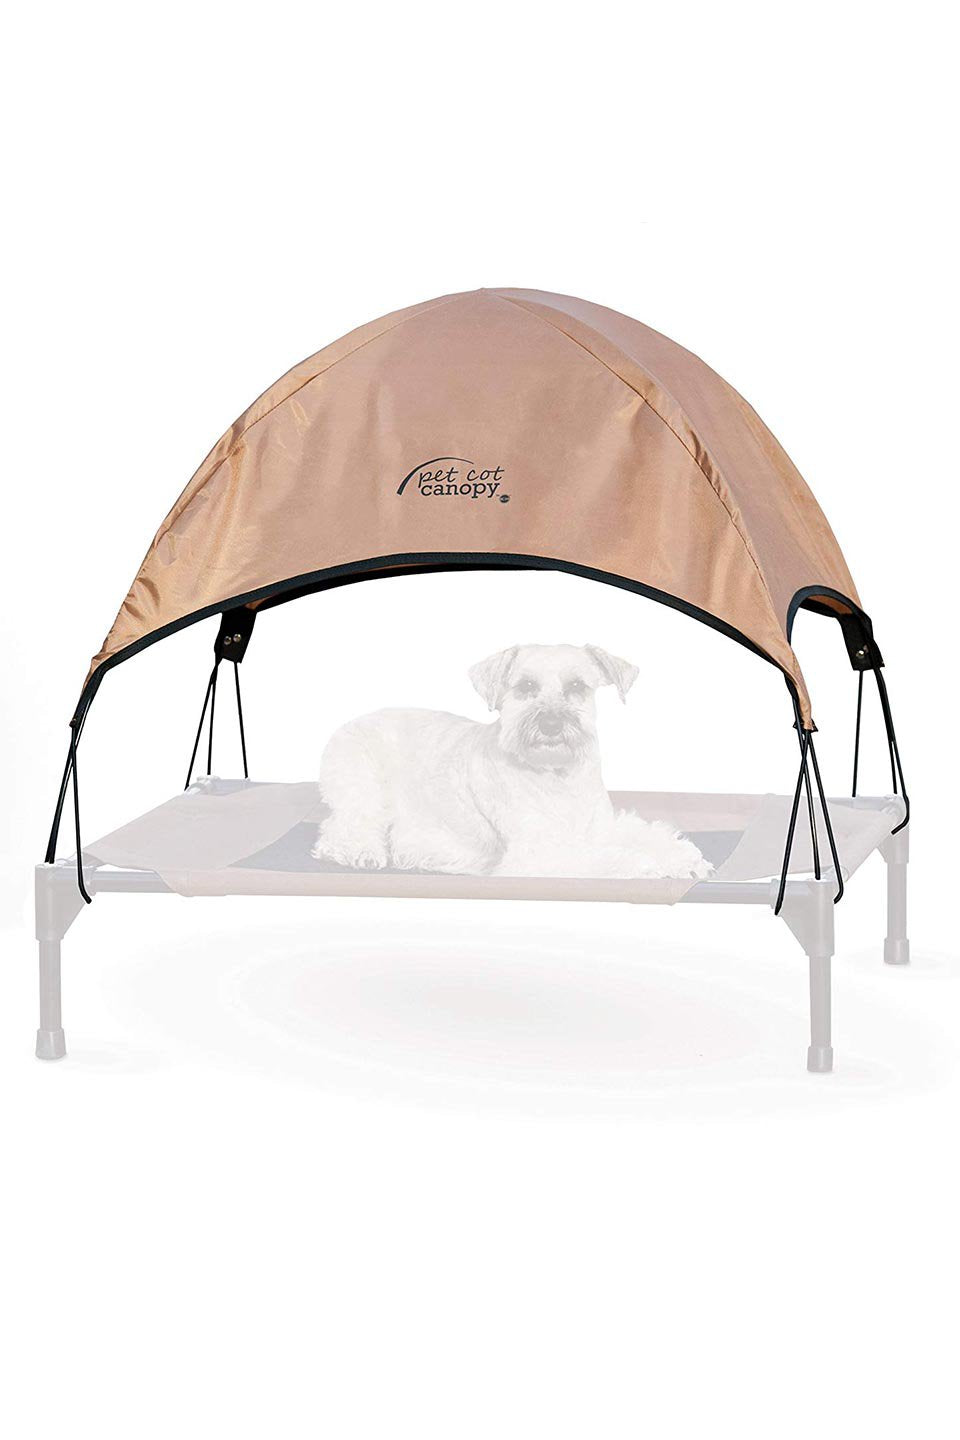 K&H Pet Cot Canopy Ｋ＆Ｈ社製ペットベッド専用テント（タン） by K&H Pet Products